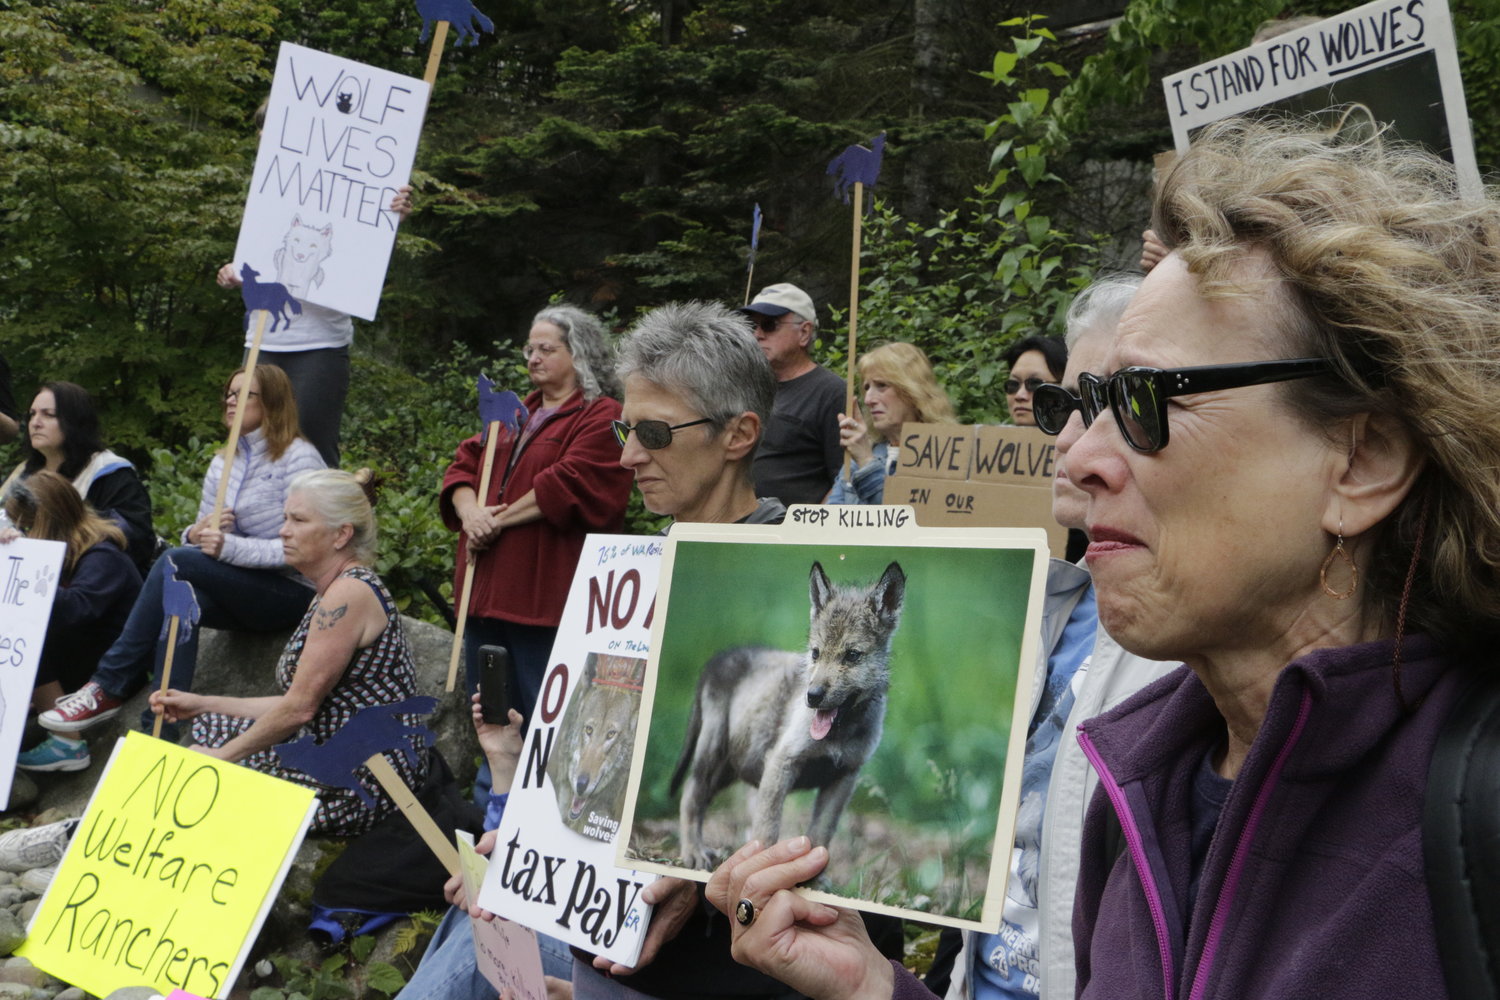 Opponents of the state's decision to eradicate a wolf pack in order to protect cattle protest outside of the Washington Department of Fish and Wildlife, Thursday, Sept. 1, 2016, in Olympia, Wash. So far, six of the 11 members of the Profanity Peak pack have been killed. 